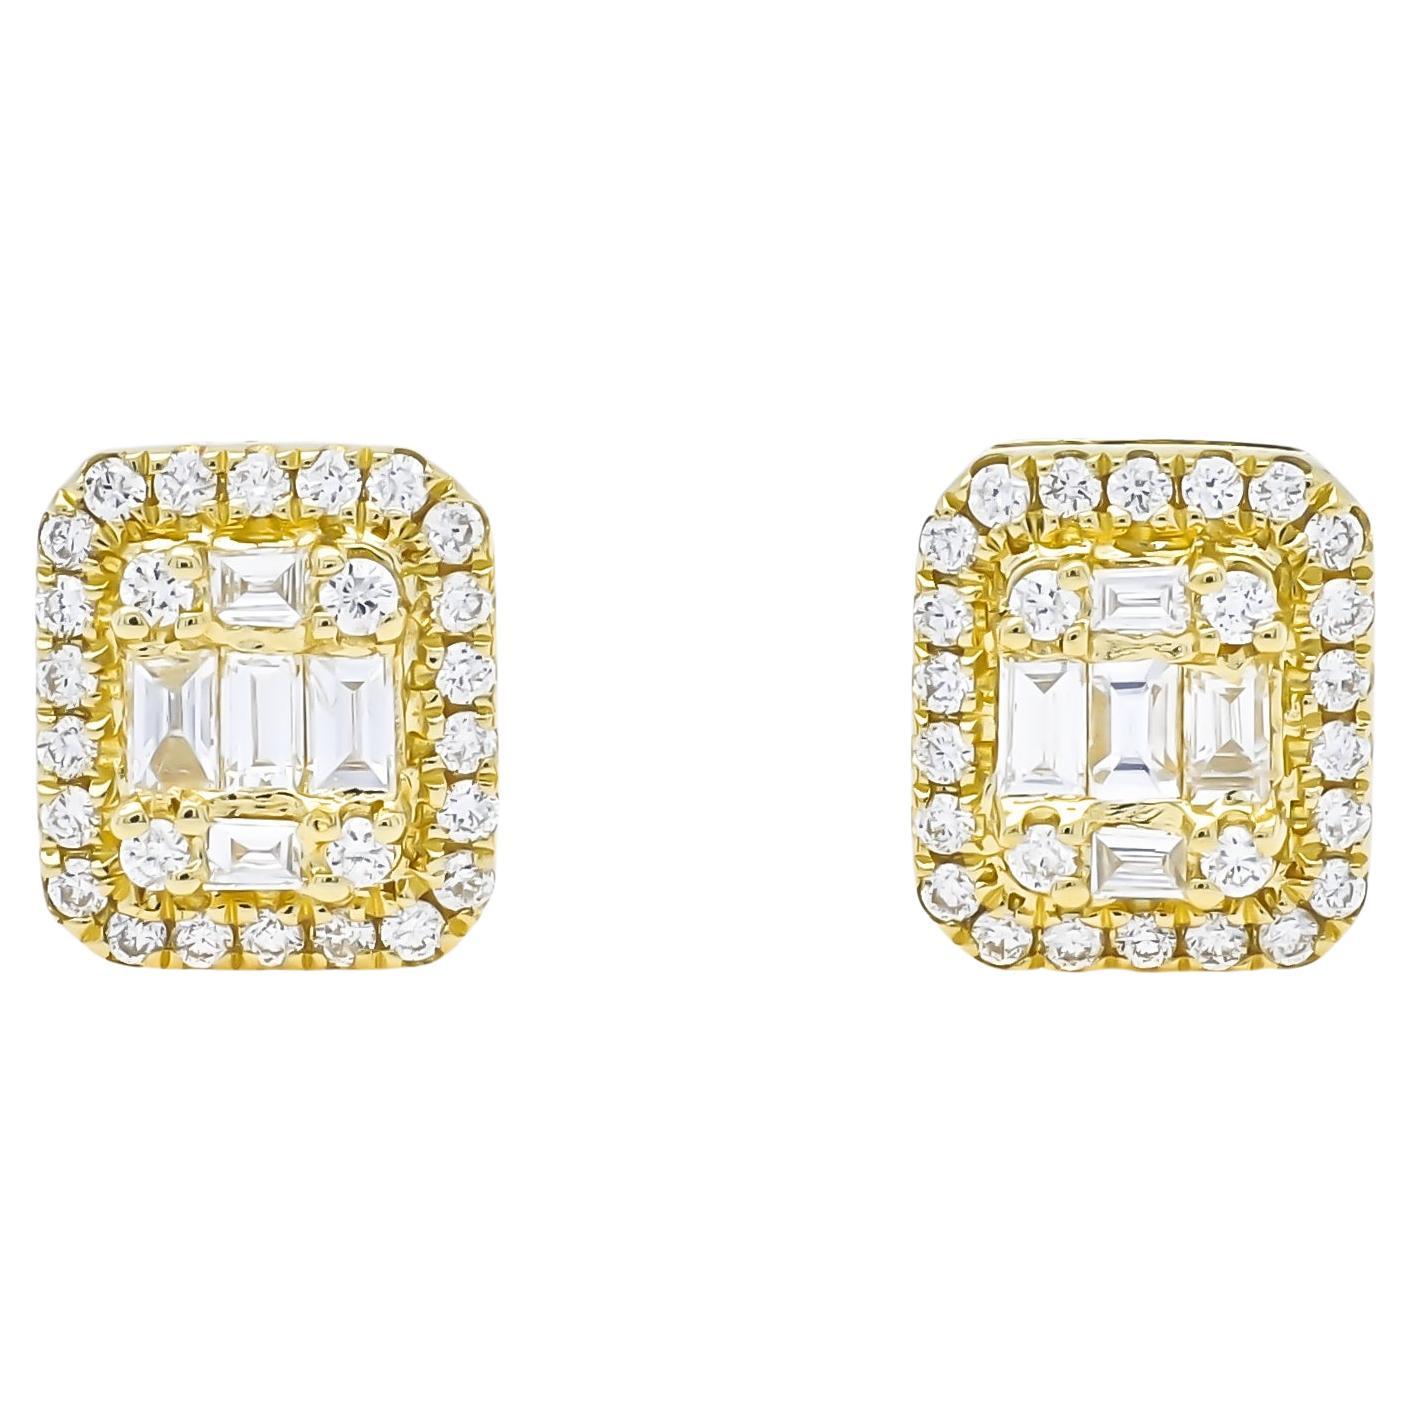 18KT Gold Baguette Diamonds Halo Cluster Emerald Illusion Stud Earrings E56027A In New Condition For Sale In Antwerpen, BE